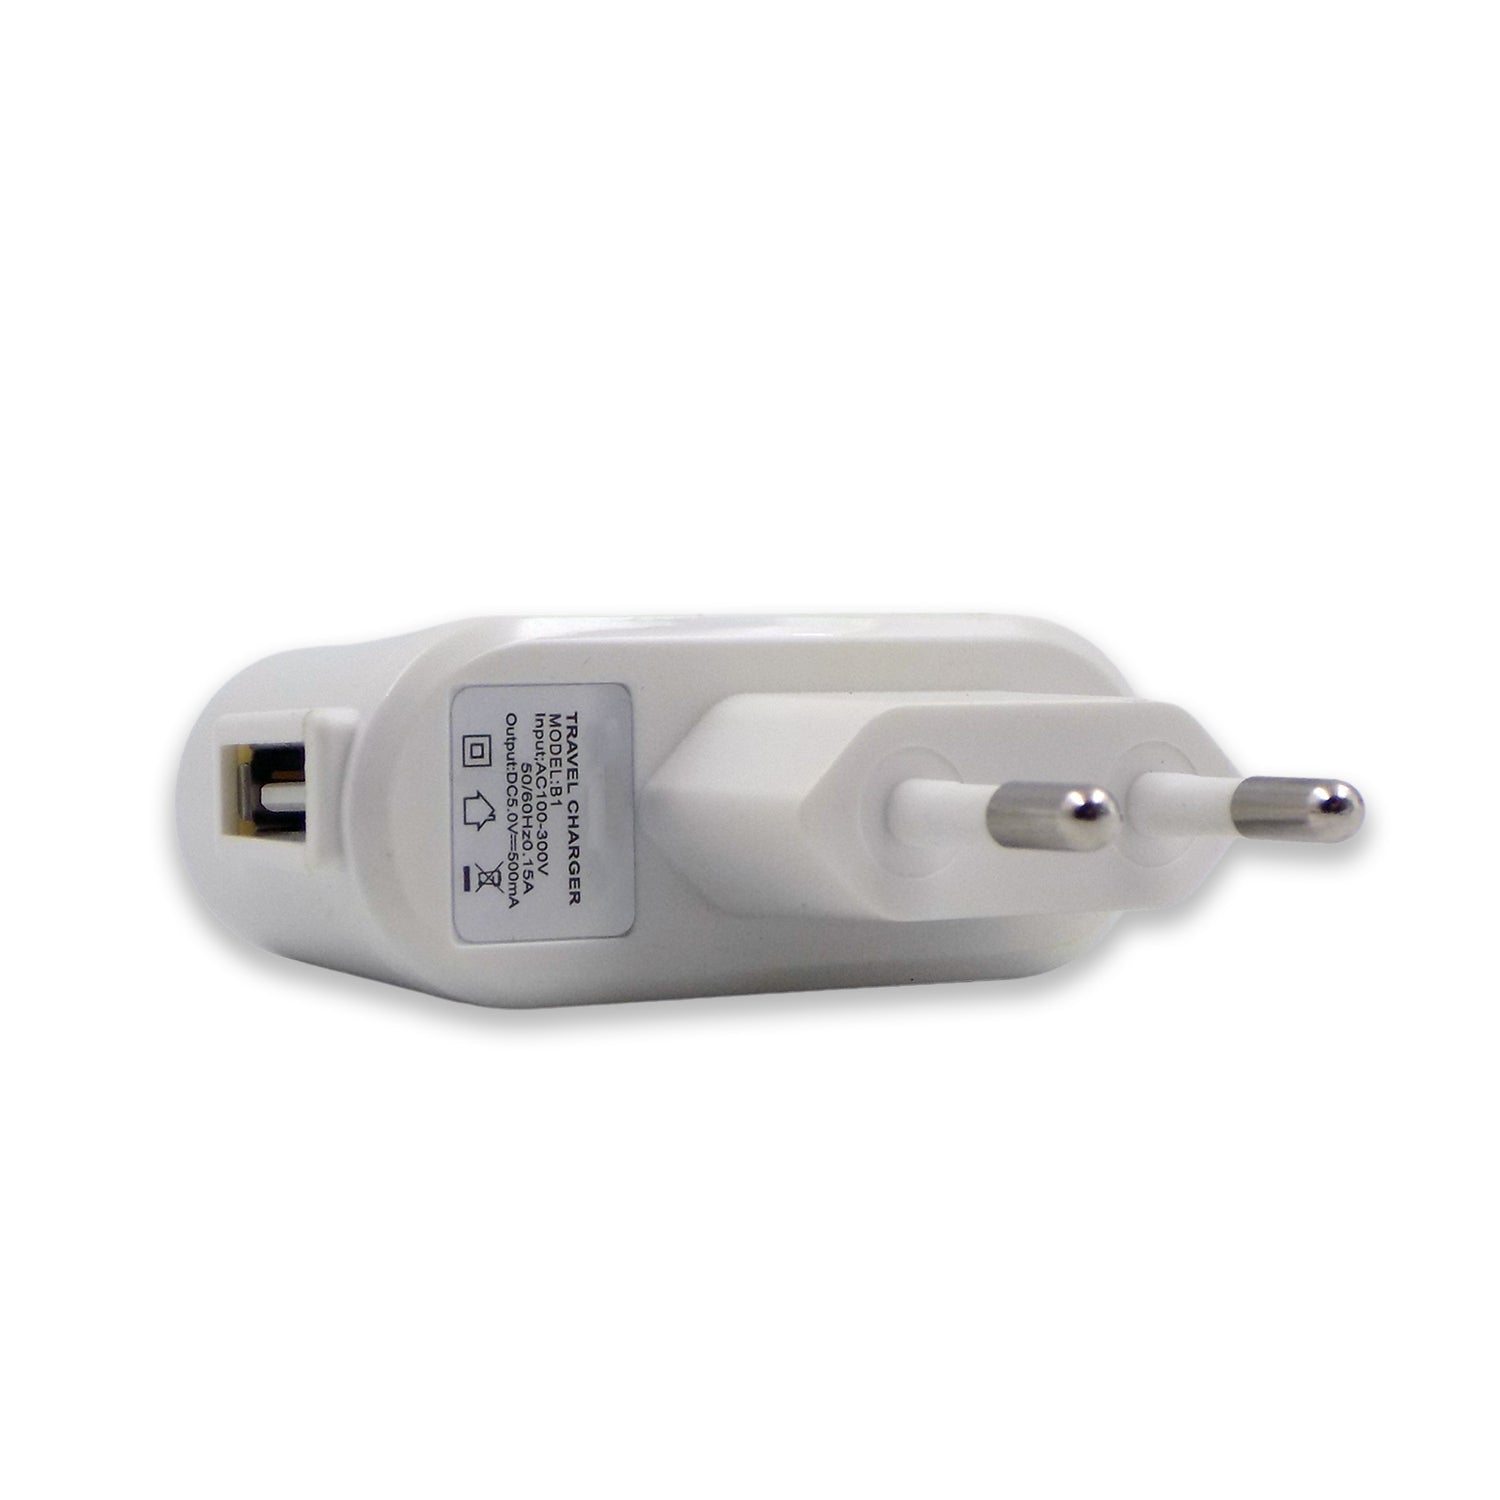 7392 Android Smartphone Charger, Travel Charger, Usb Charger (USB Cable Not Included)